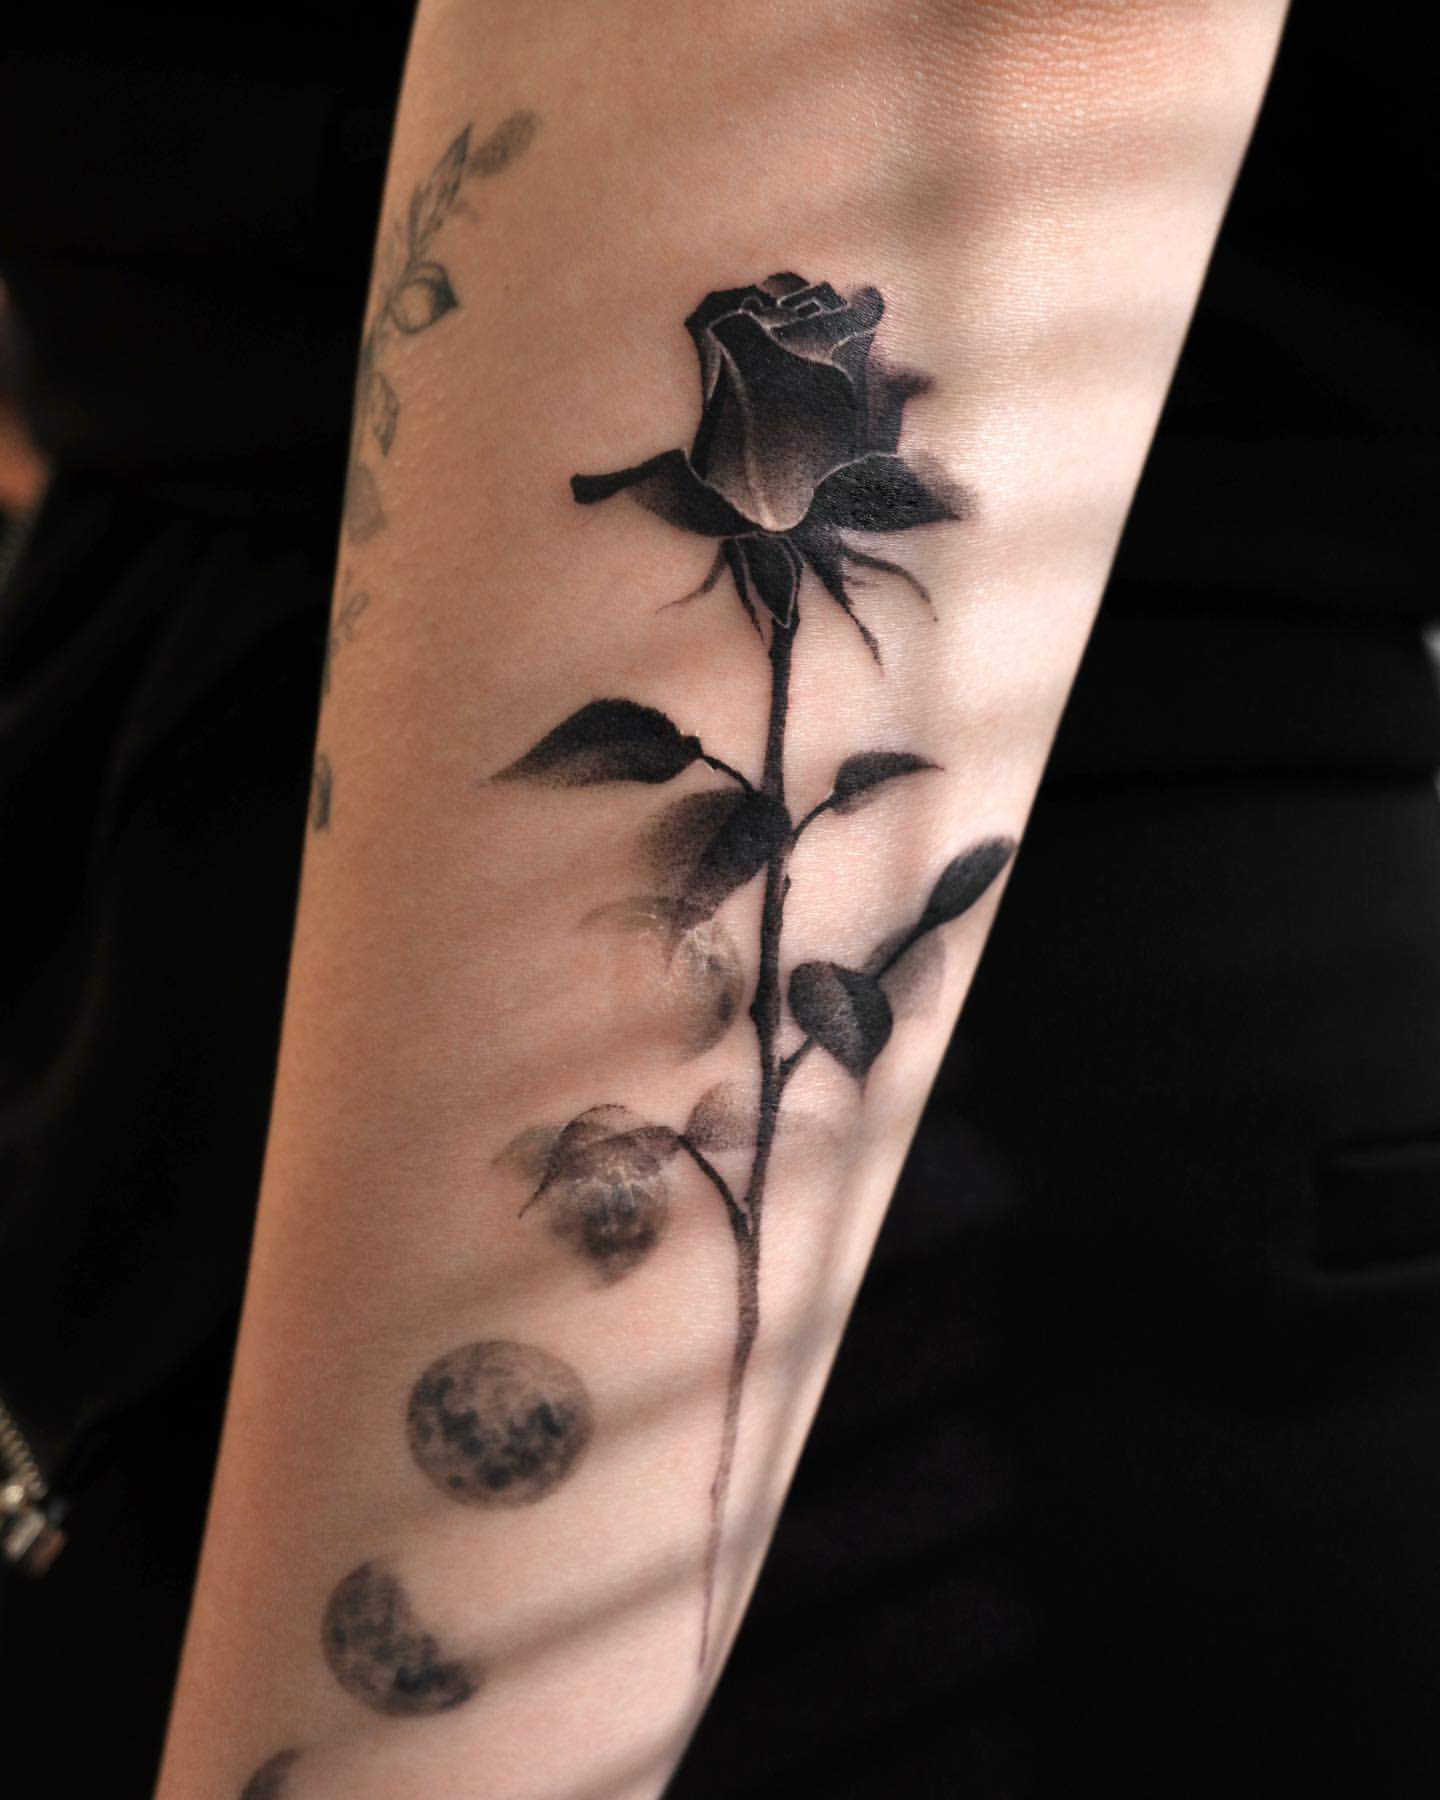 40 Awesome Rose Tattoo Ideas for Men & Women in 2023